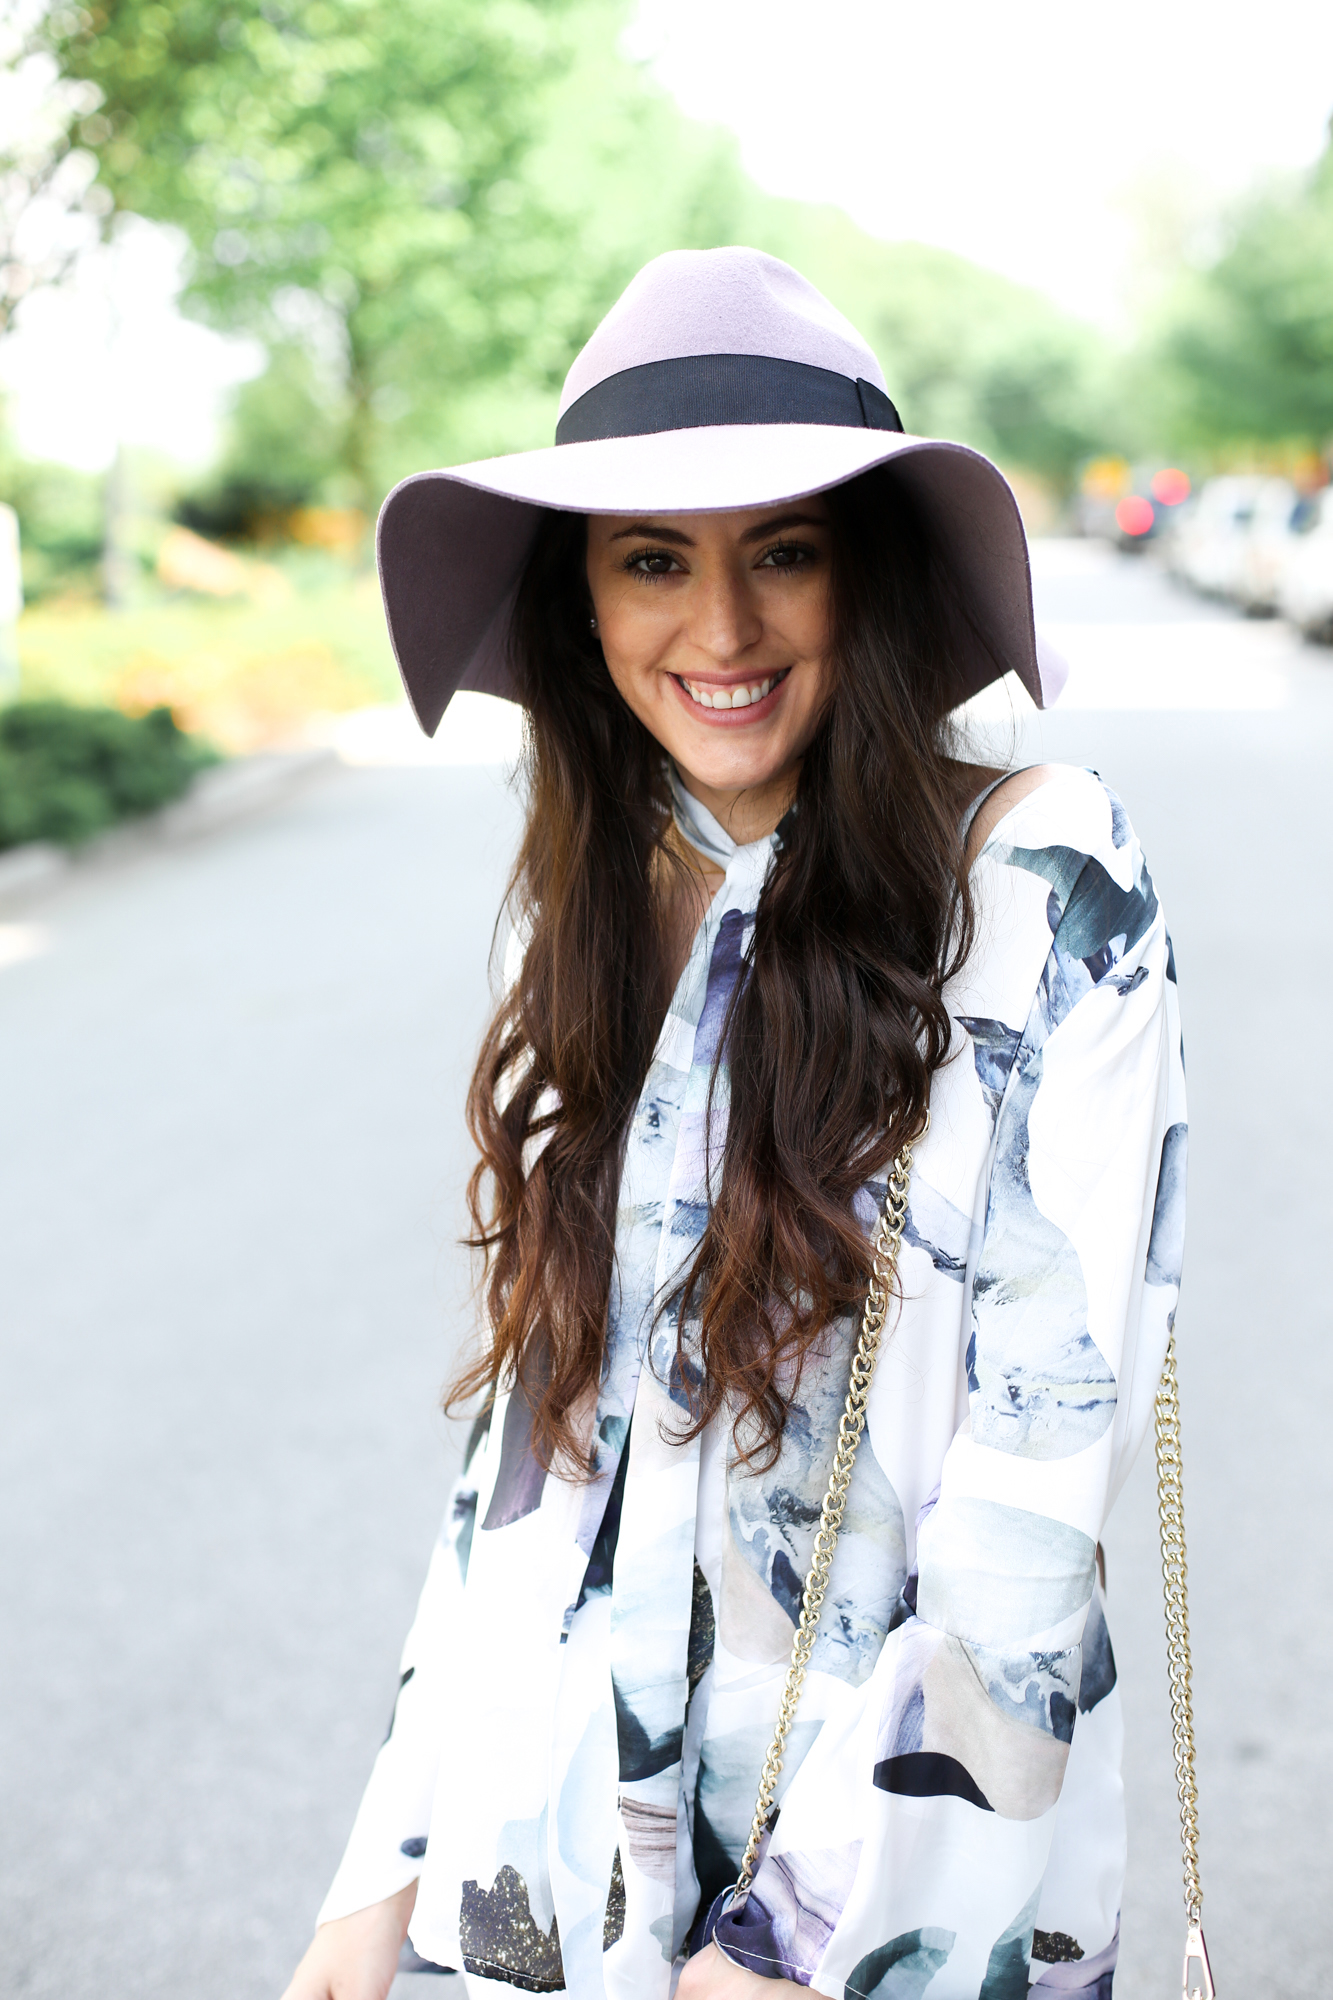 spring style, 70s vibes, 60s glam, 70s glam, spring chic, how to style a hat for spring, chinese laundry theresa smoke grey, purple floppy hat, wide brim fedora, wide brim hat, rebecca minkoff fringe crossbody